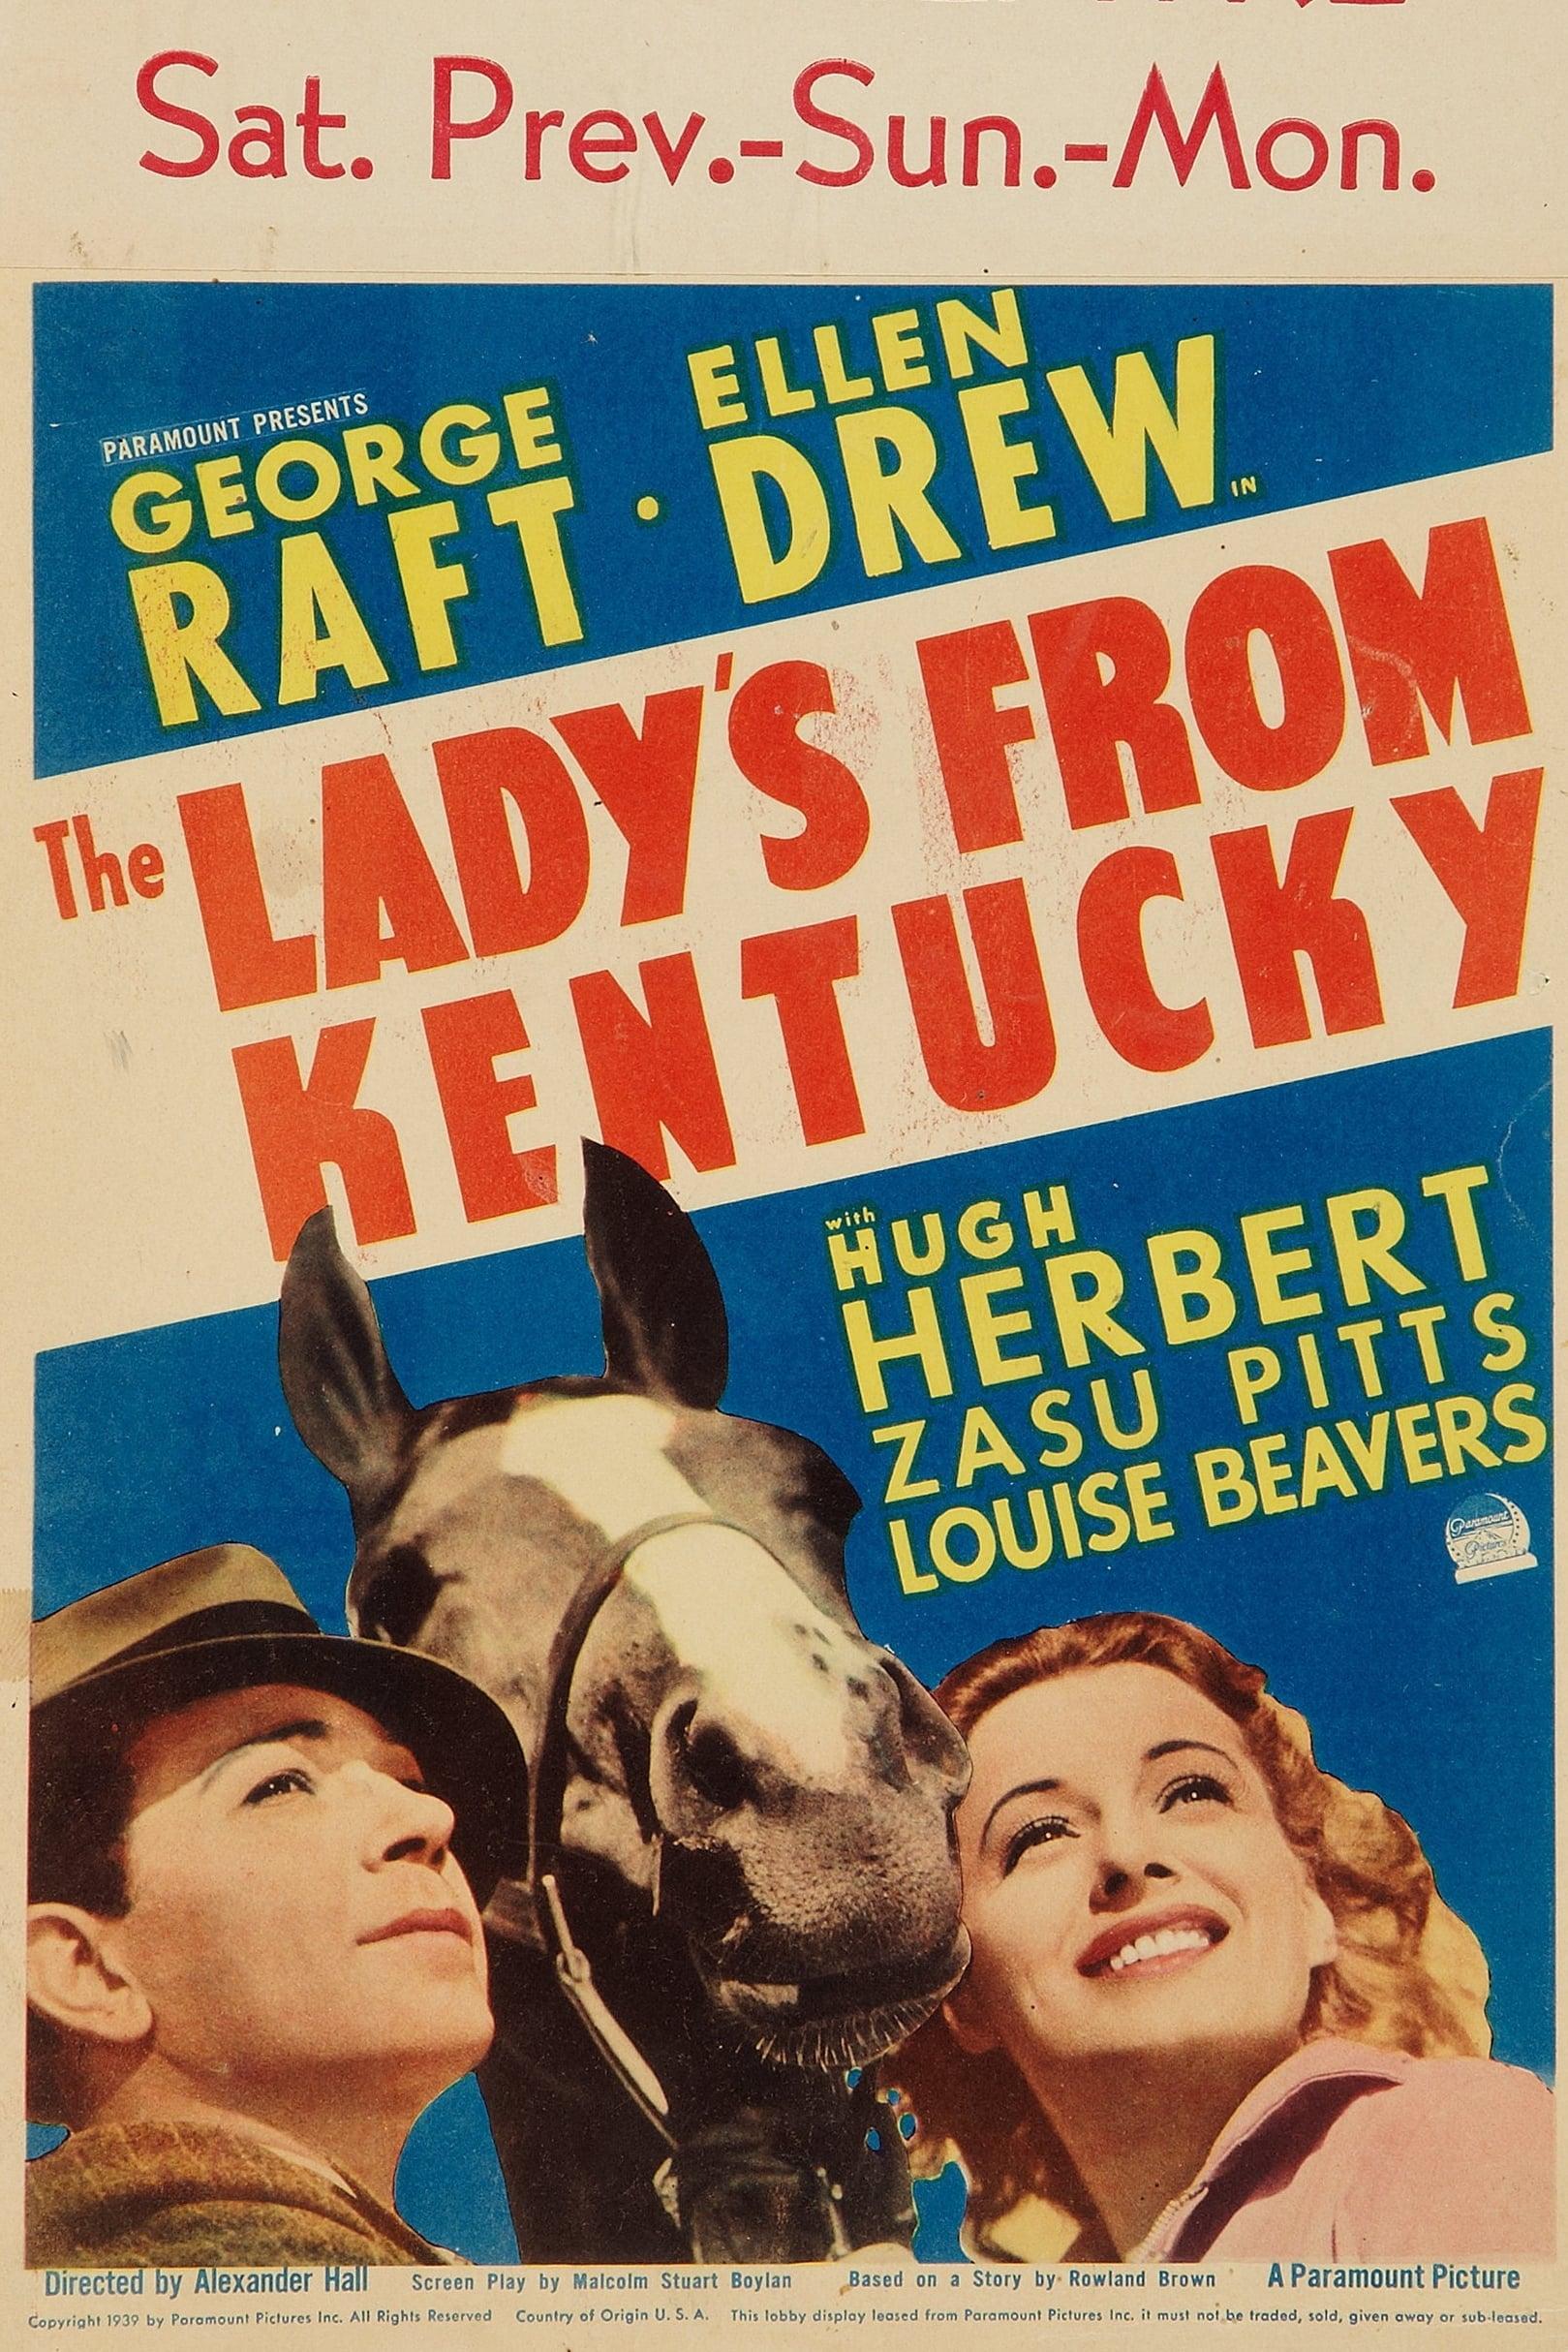 The Lady's from Kentucky poster